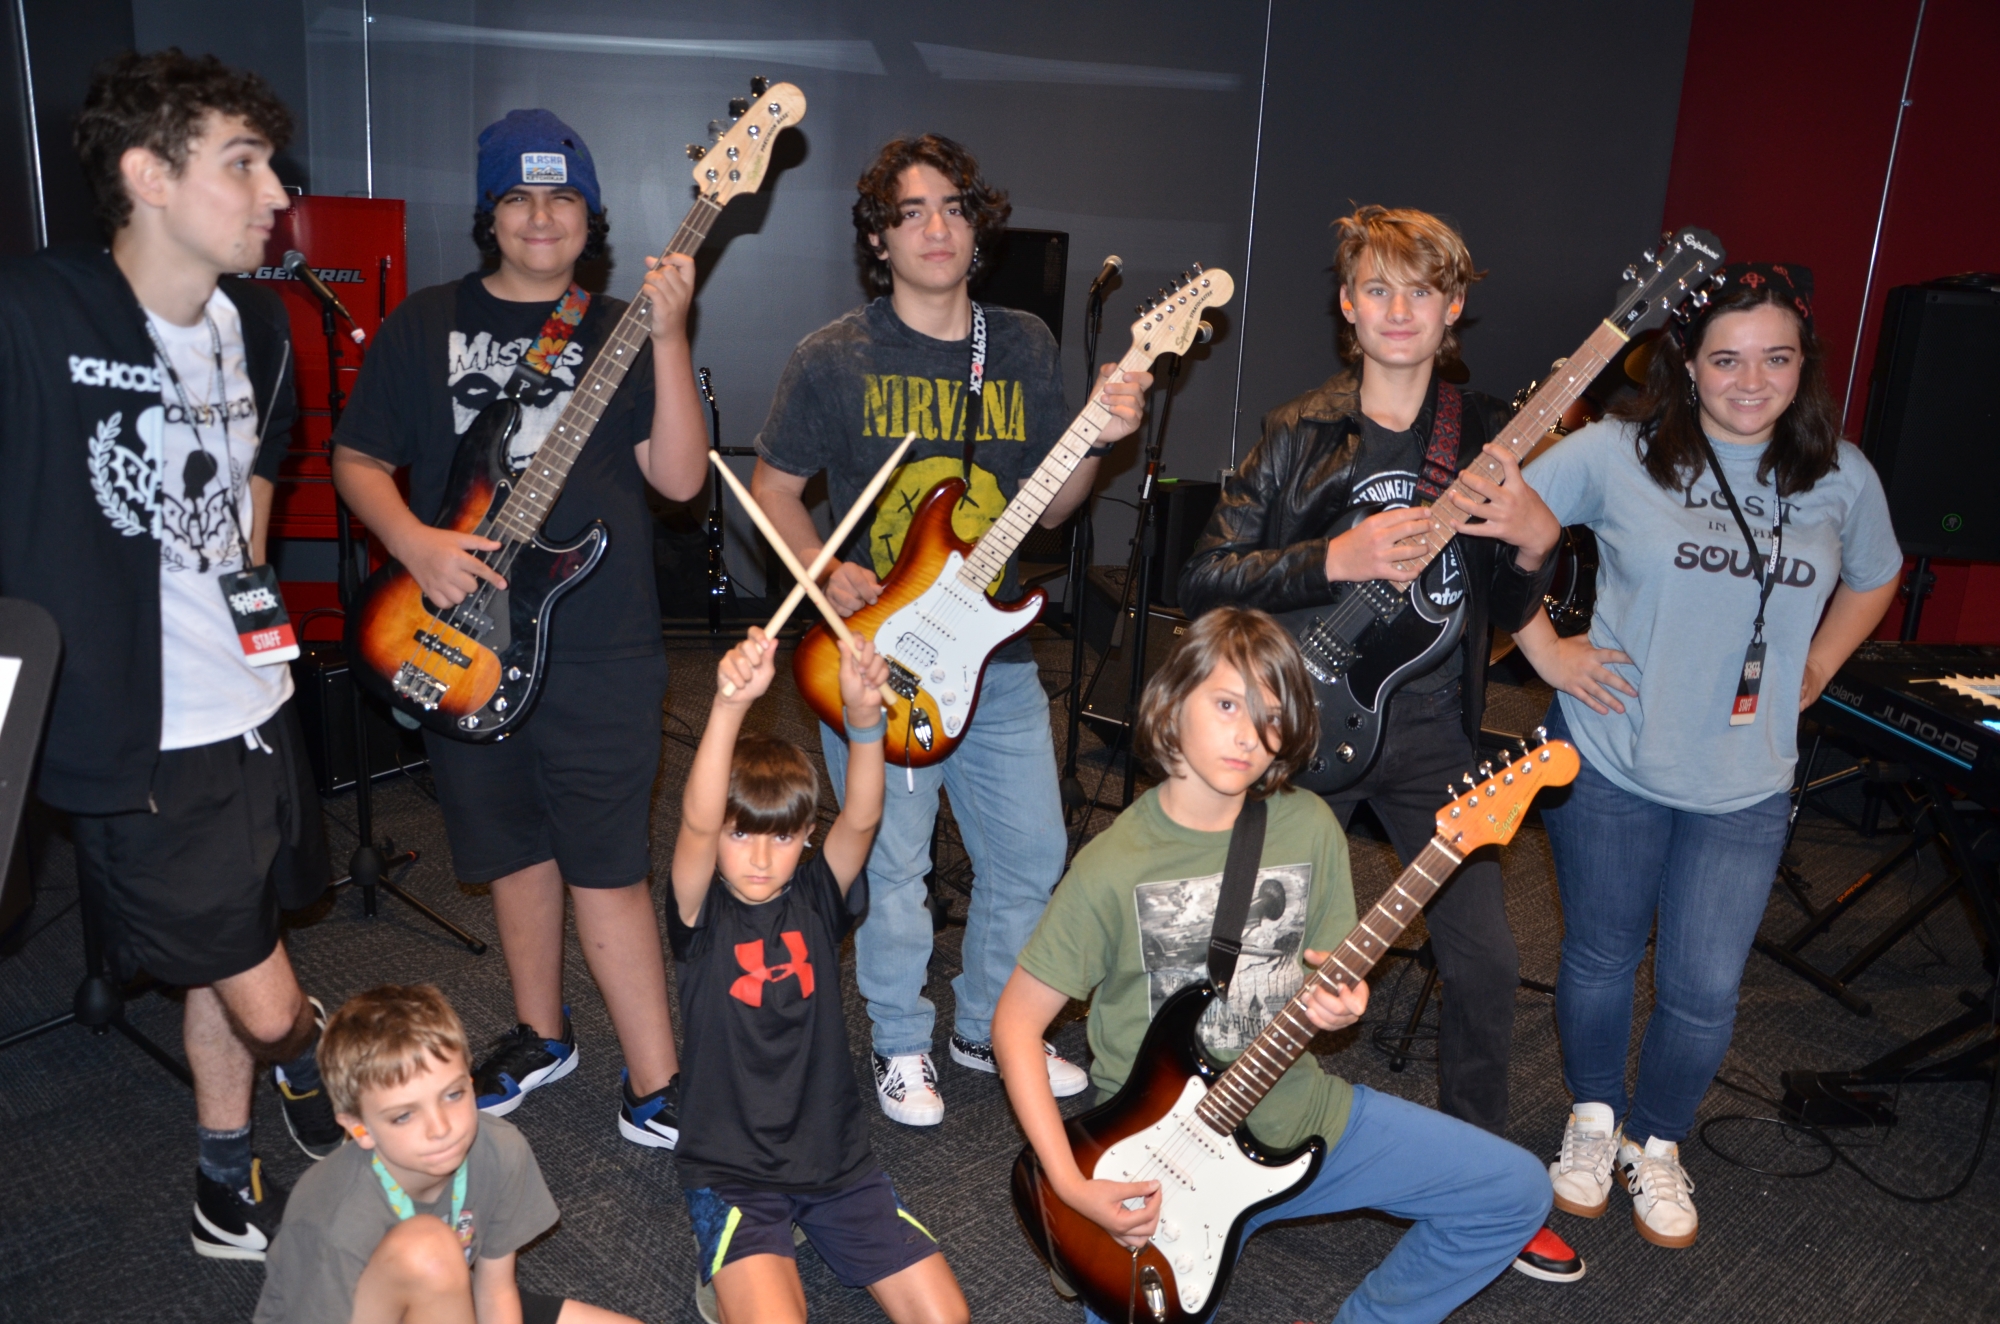 Green Tomorrow, the Greem Day cover band, August 2023
This was the first group to learn and play at School of Rock Burlington, which opened Aug. 5, 2023!